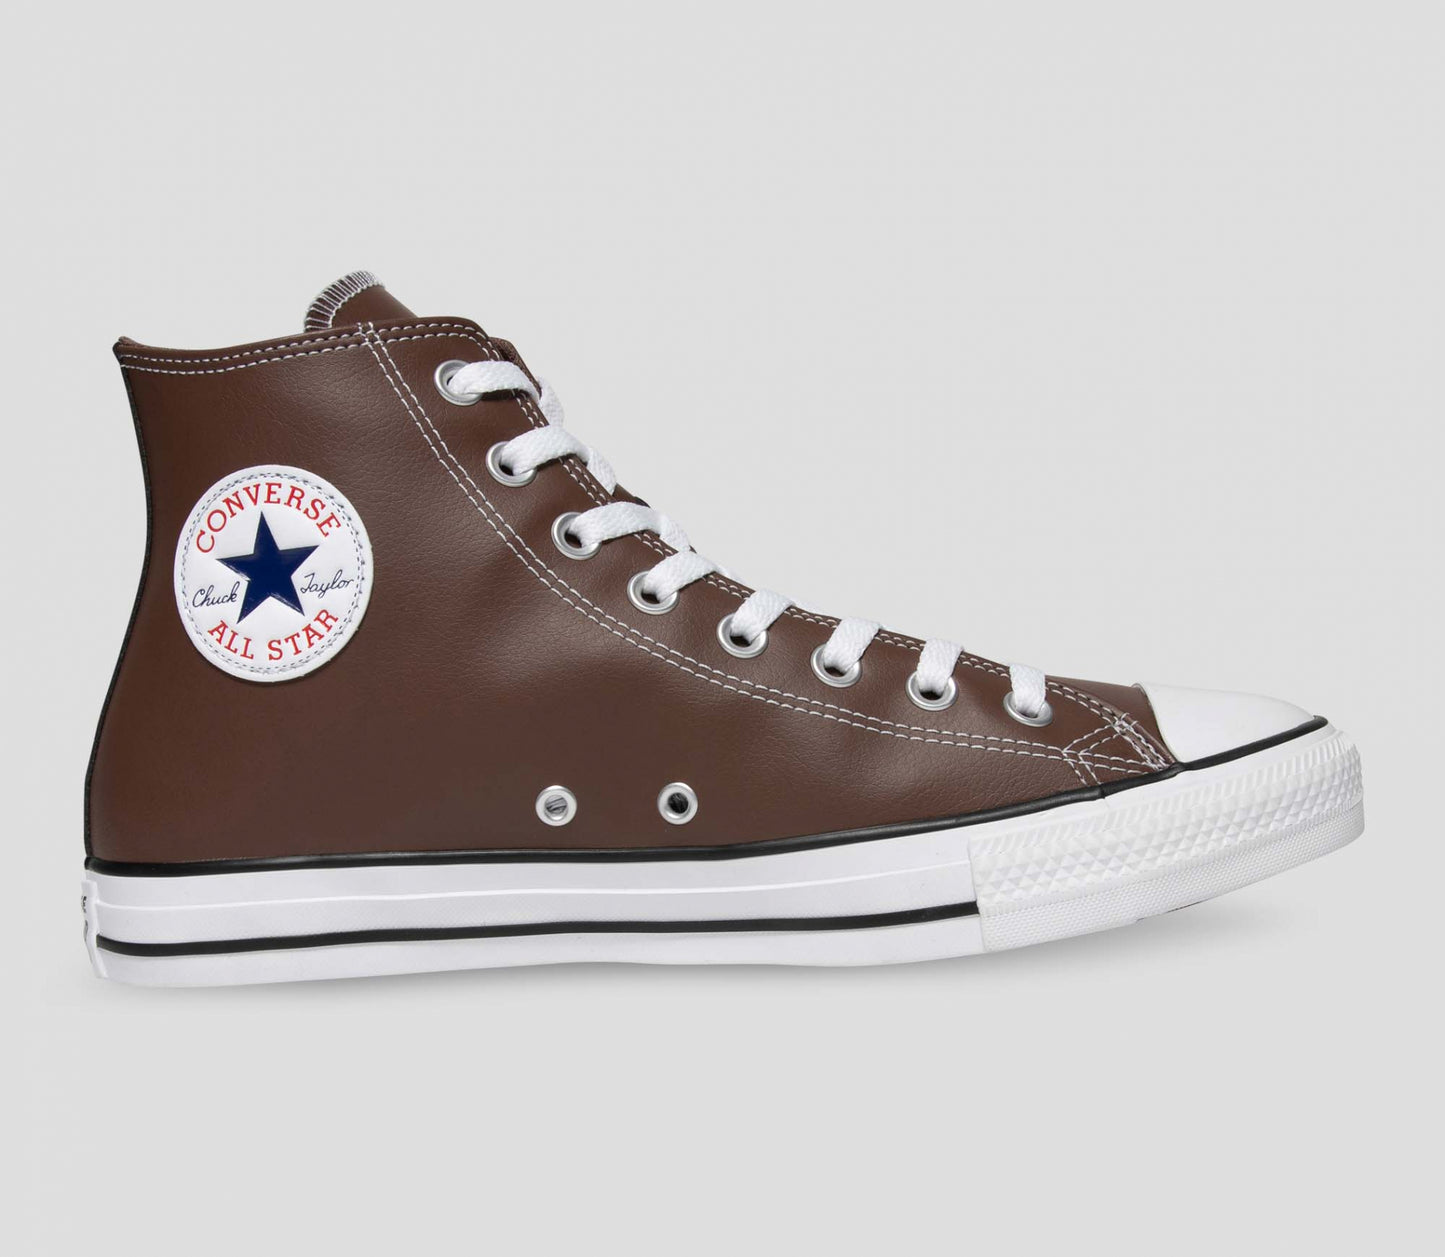 CONVERSE CHUCK TAYLOR ALL STAR FAUX LEATHER HIGH TOP - BRAZIL NUT